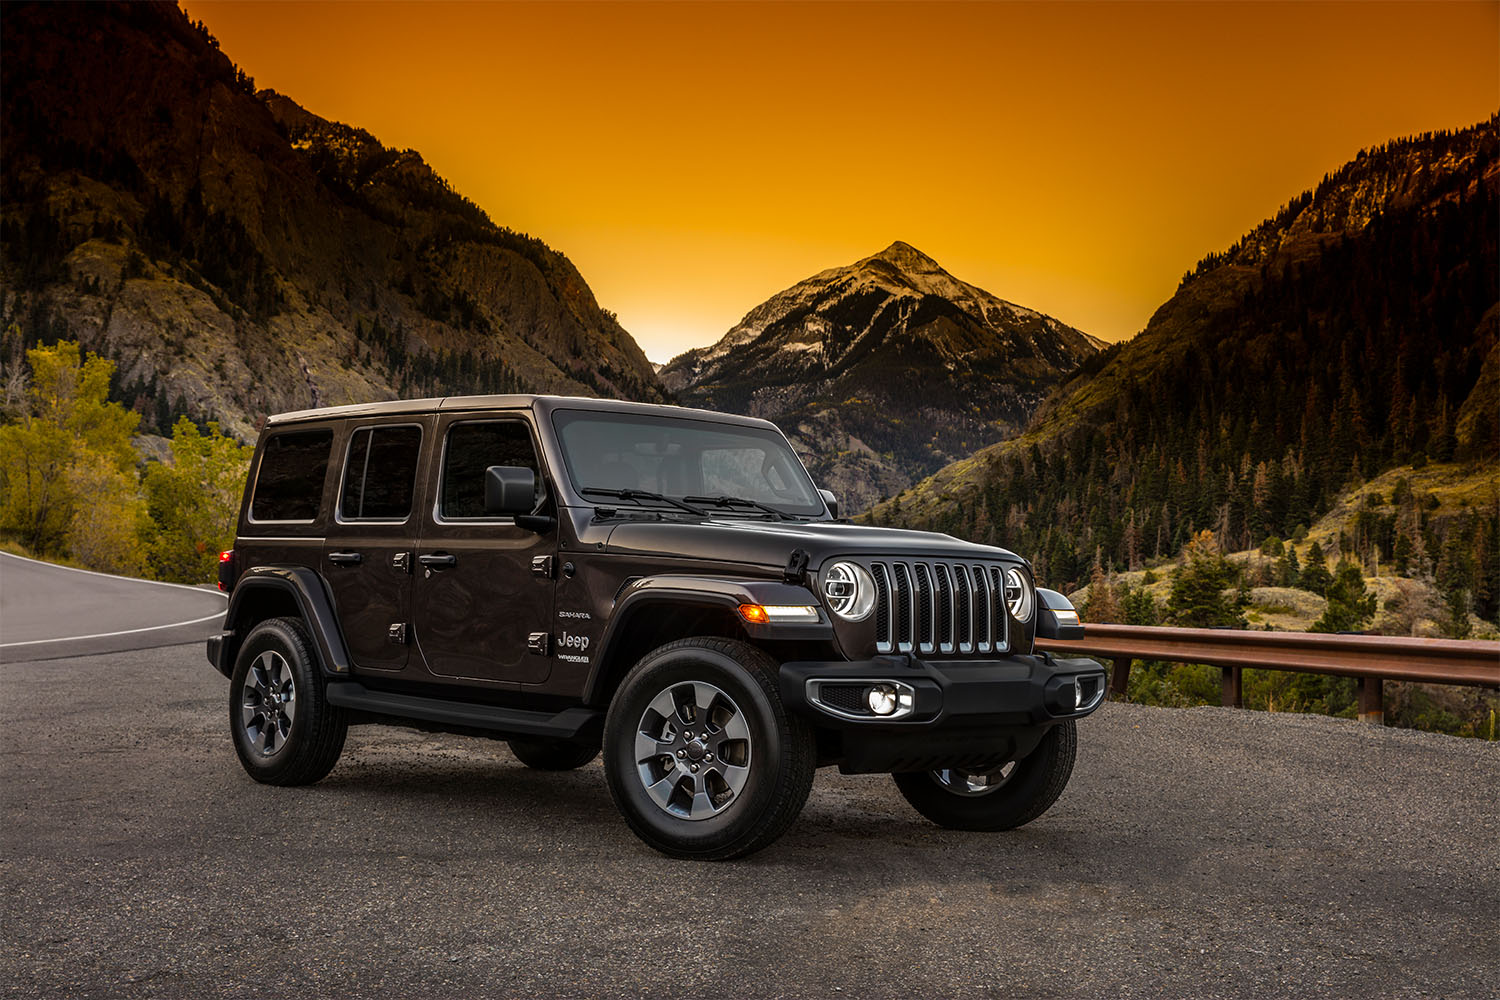 Jeep Wrangler Unlimiteds available in Grand Rapids, MI at Courtesy Chrysler Jeep Dodge Ram